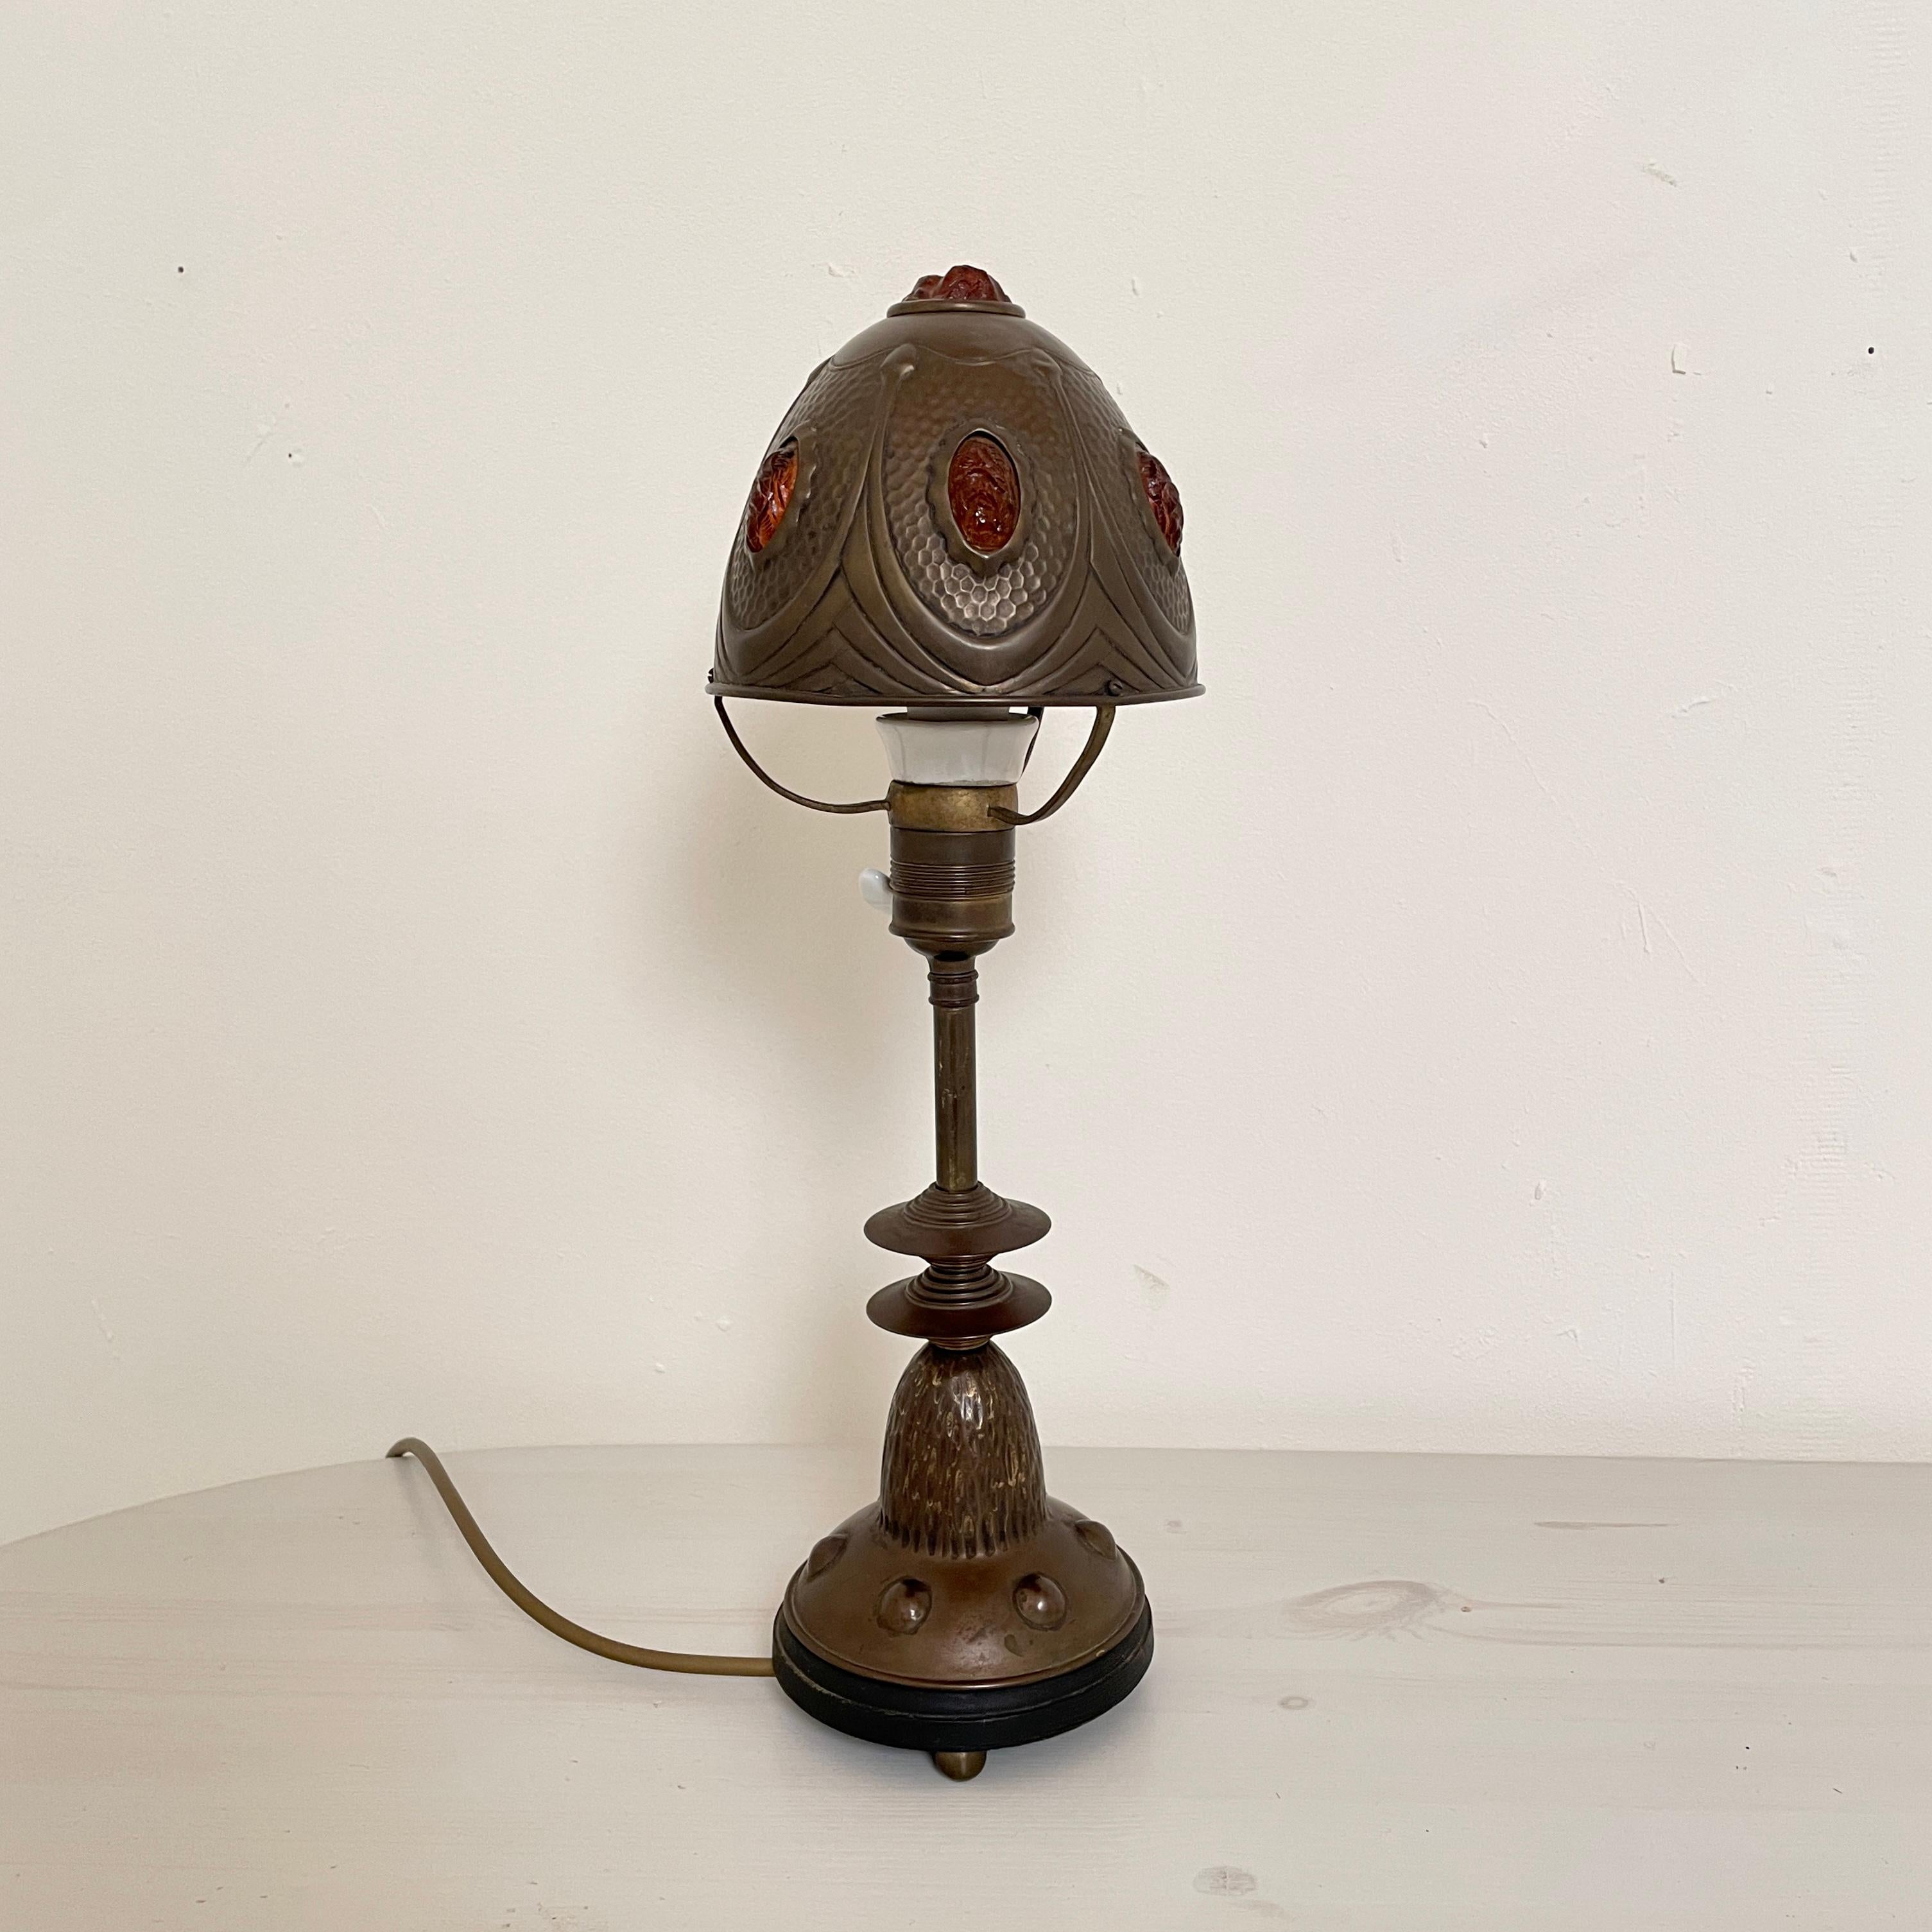 Mid-20th Century German Art Deco Table Lamp in Brass and colored Glass, around 1930 For Sale